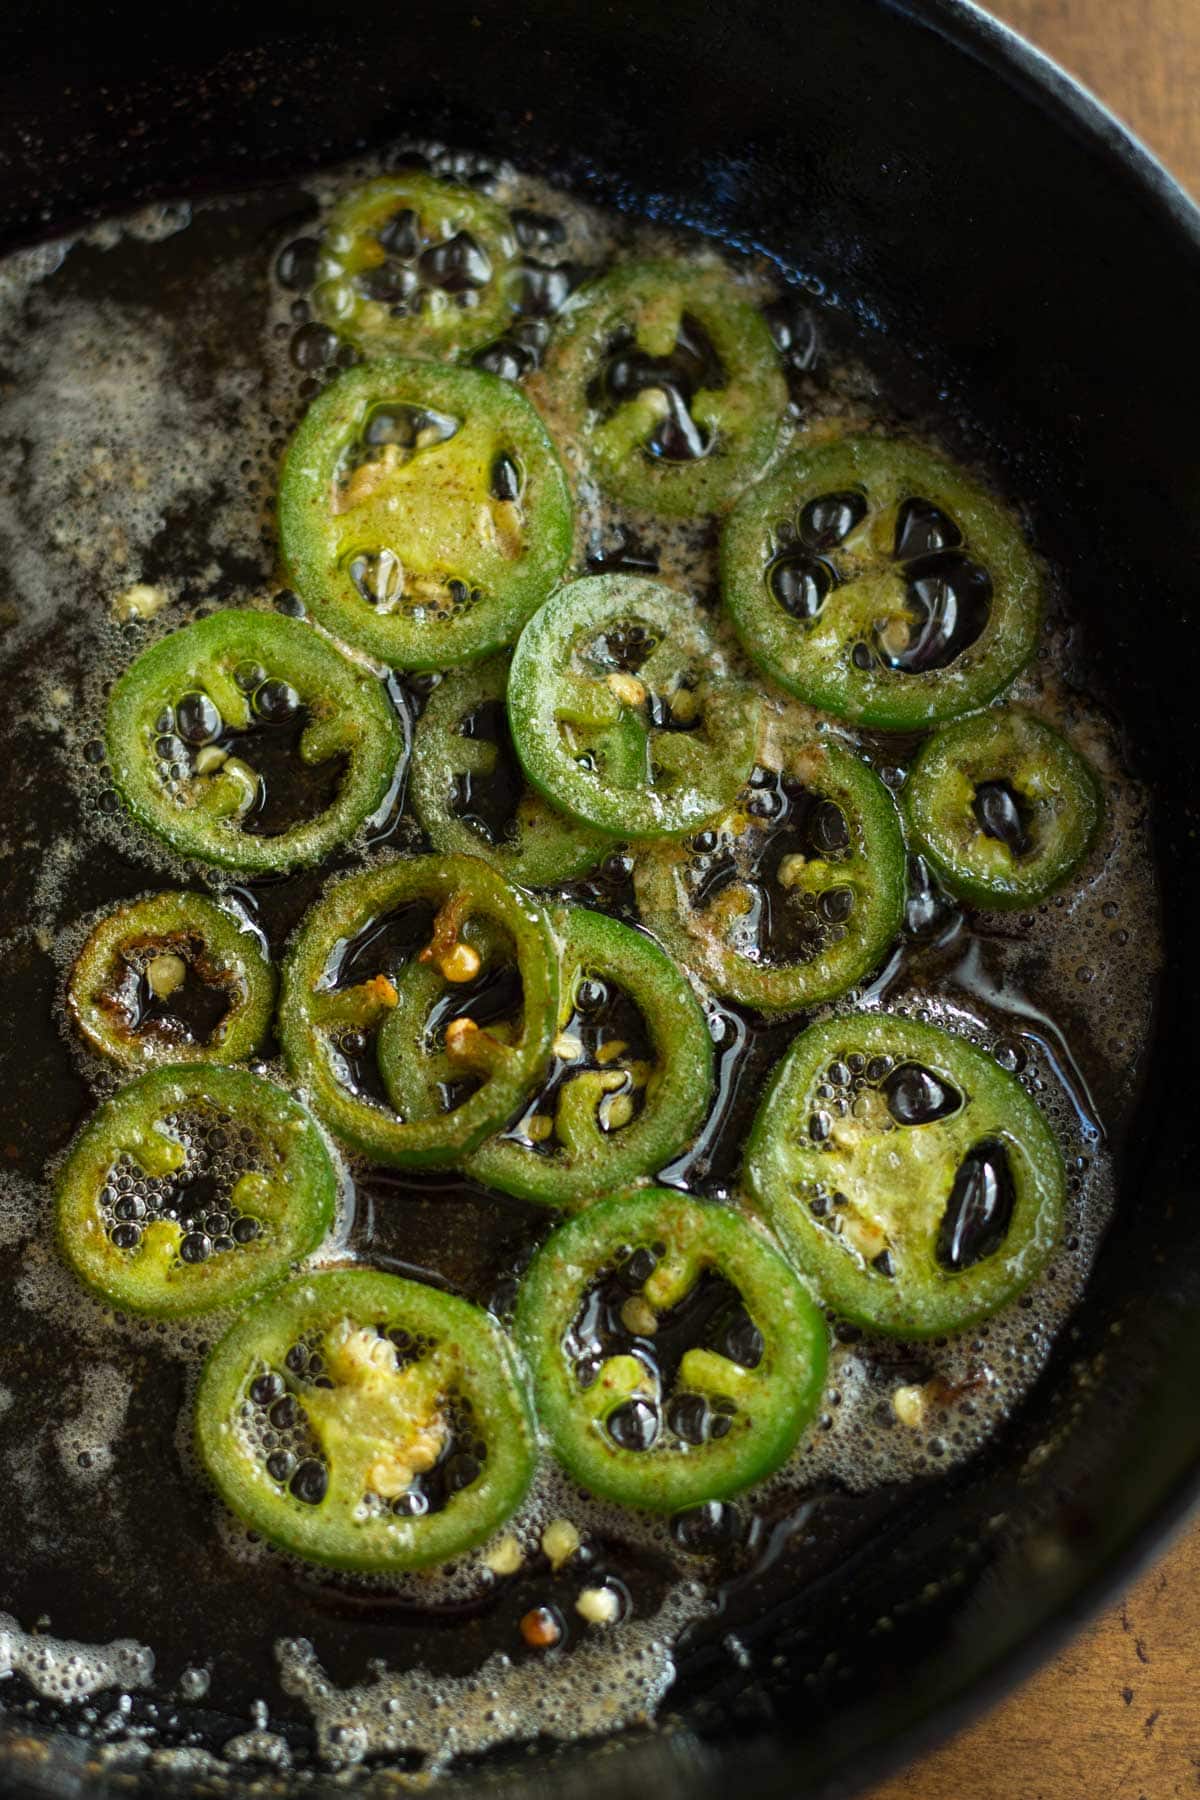 Slices of jalapeno cooking in butter.